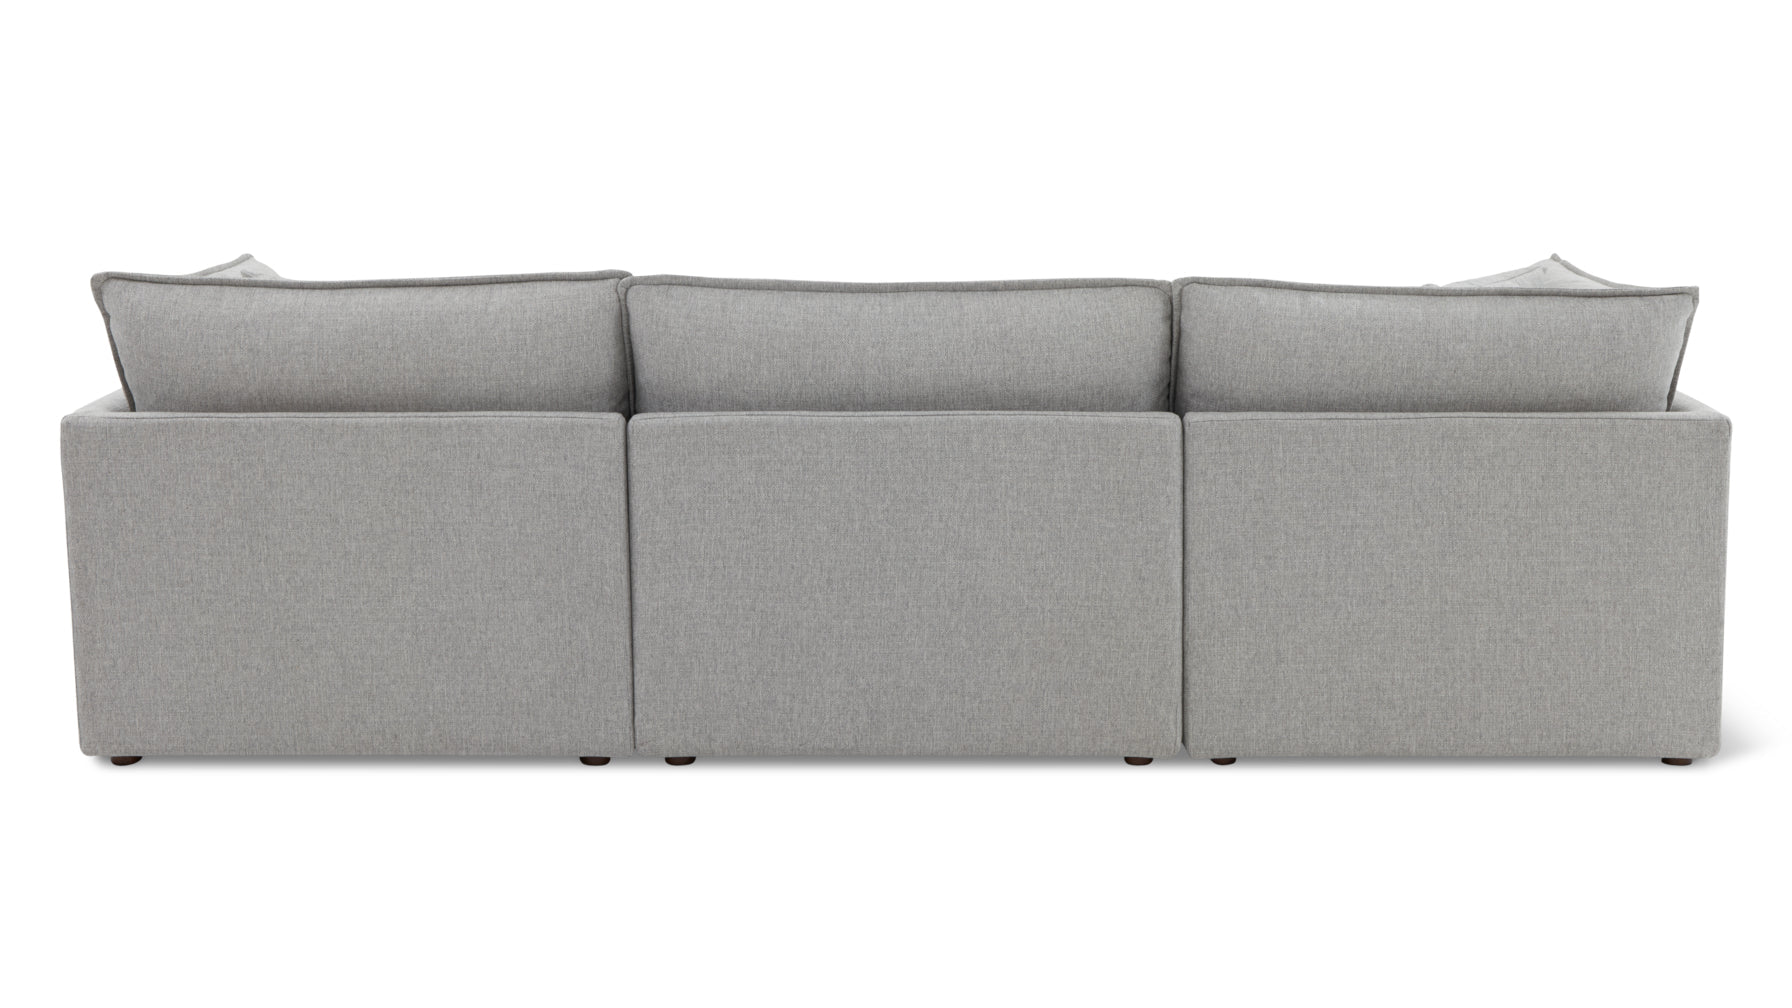 Chill Time 4-Piece Modular Sectional, Heather - Image 4